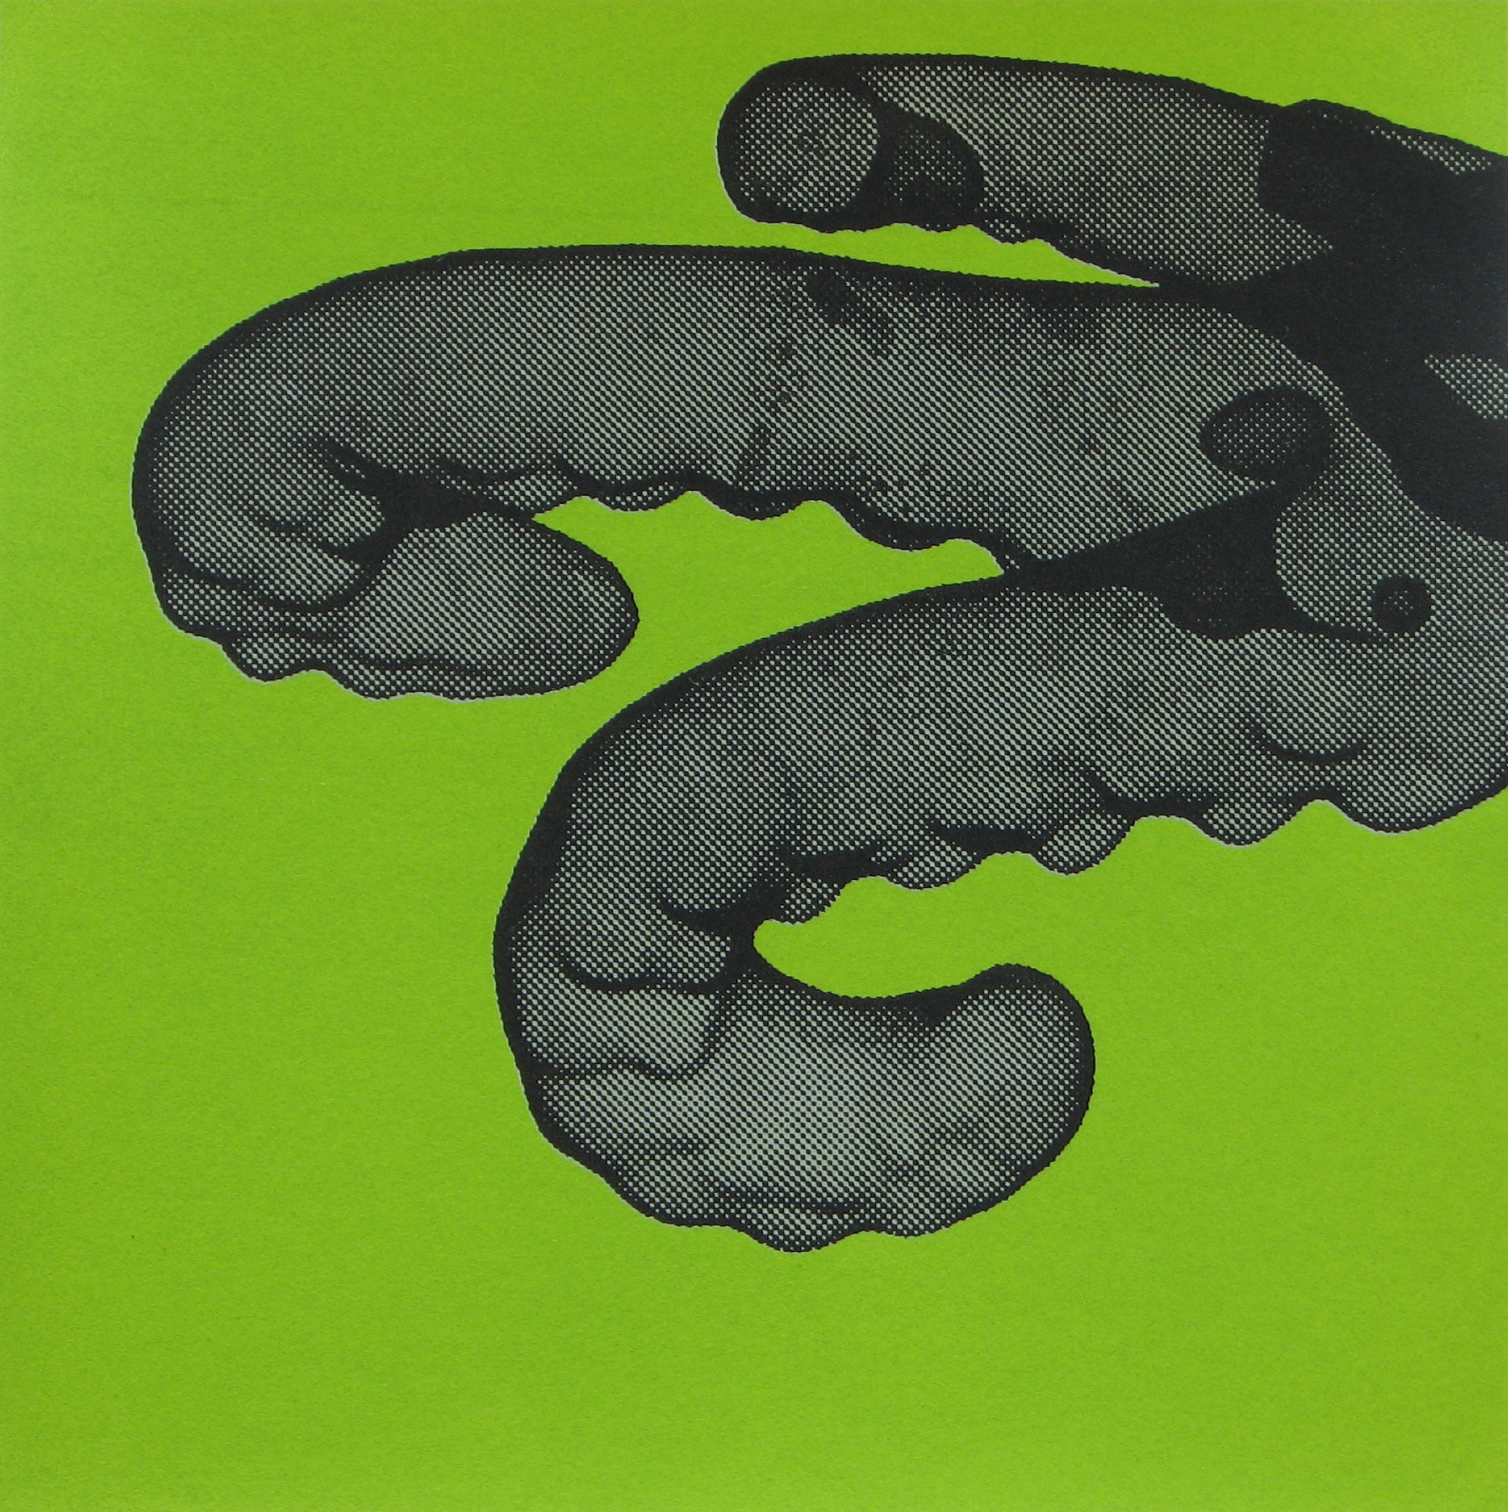 Copy of Erica Seccombe, Tentacles (green) 2007. 